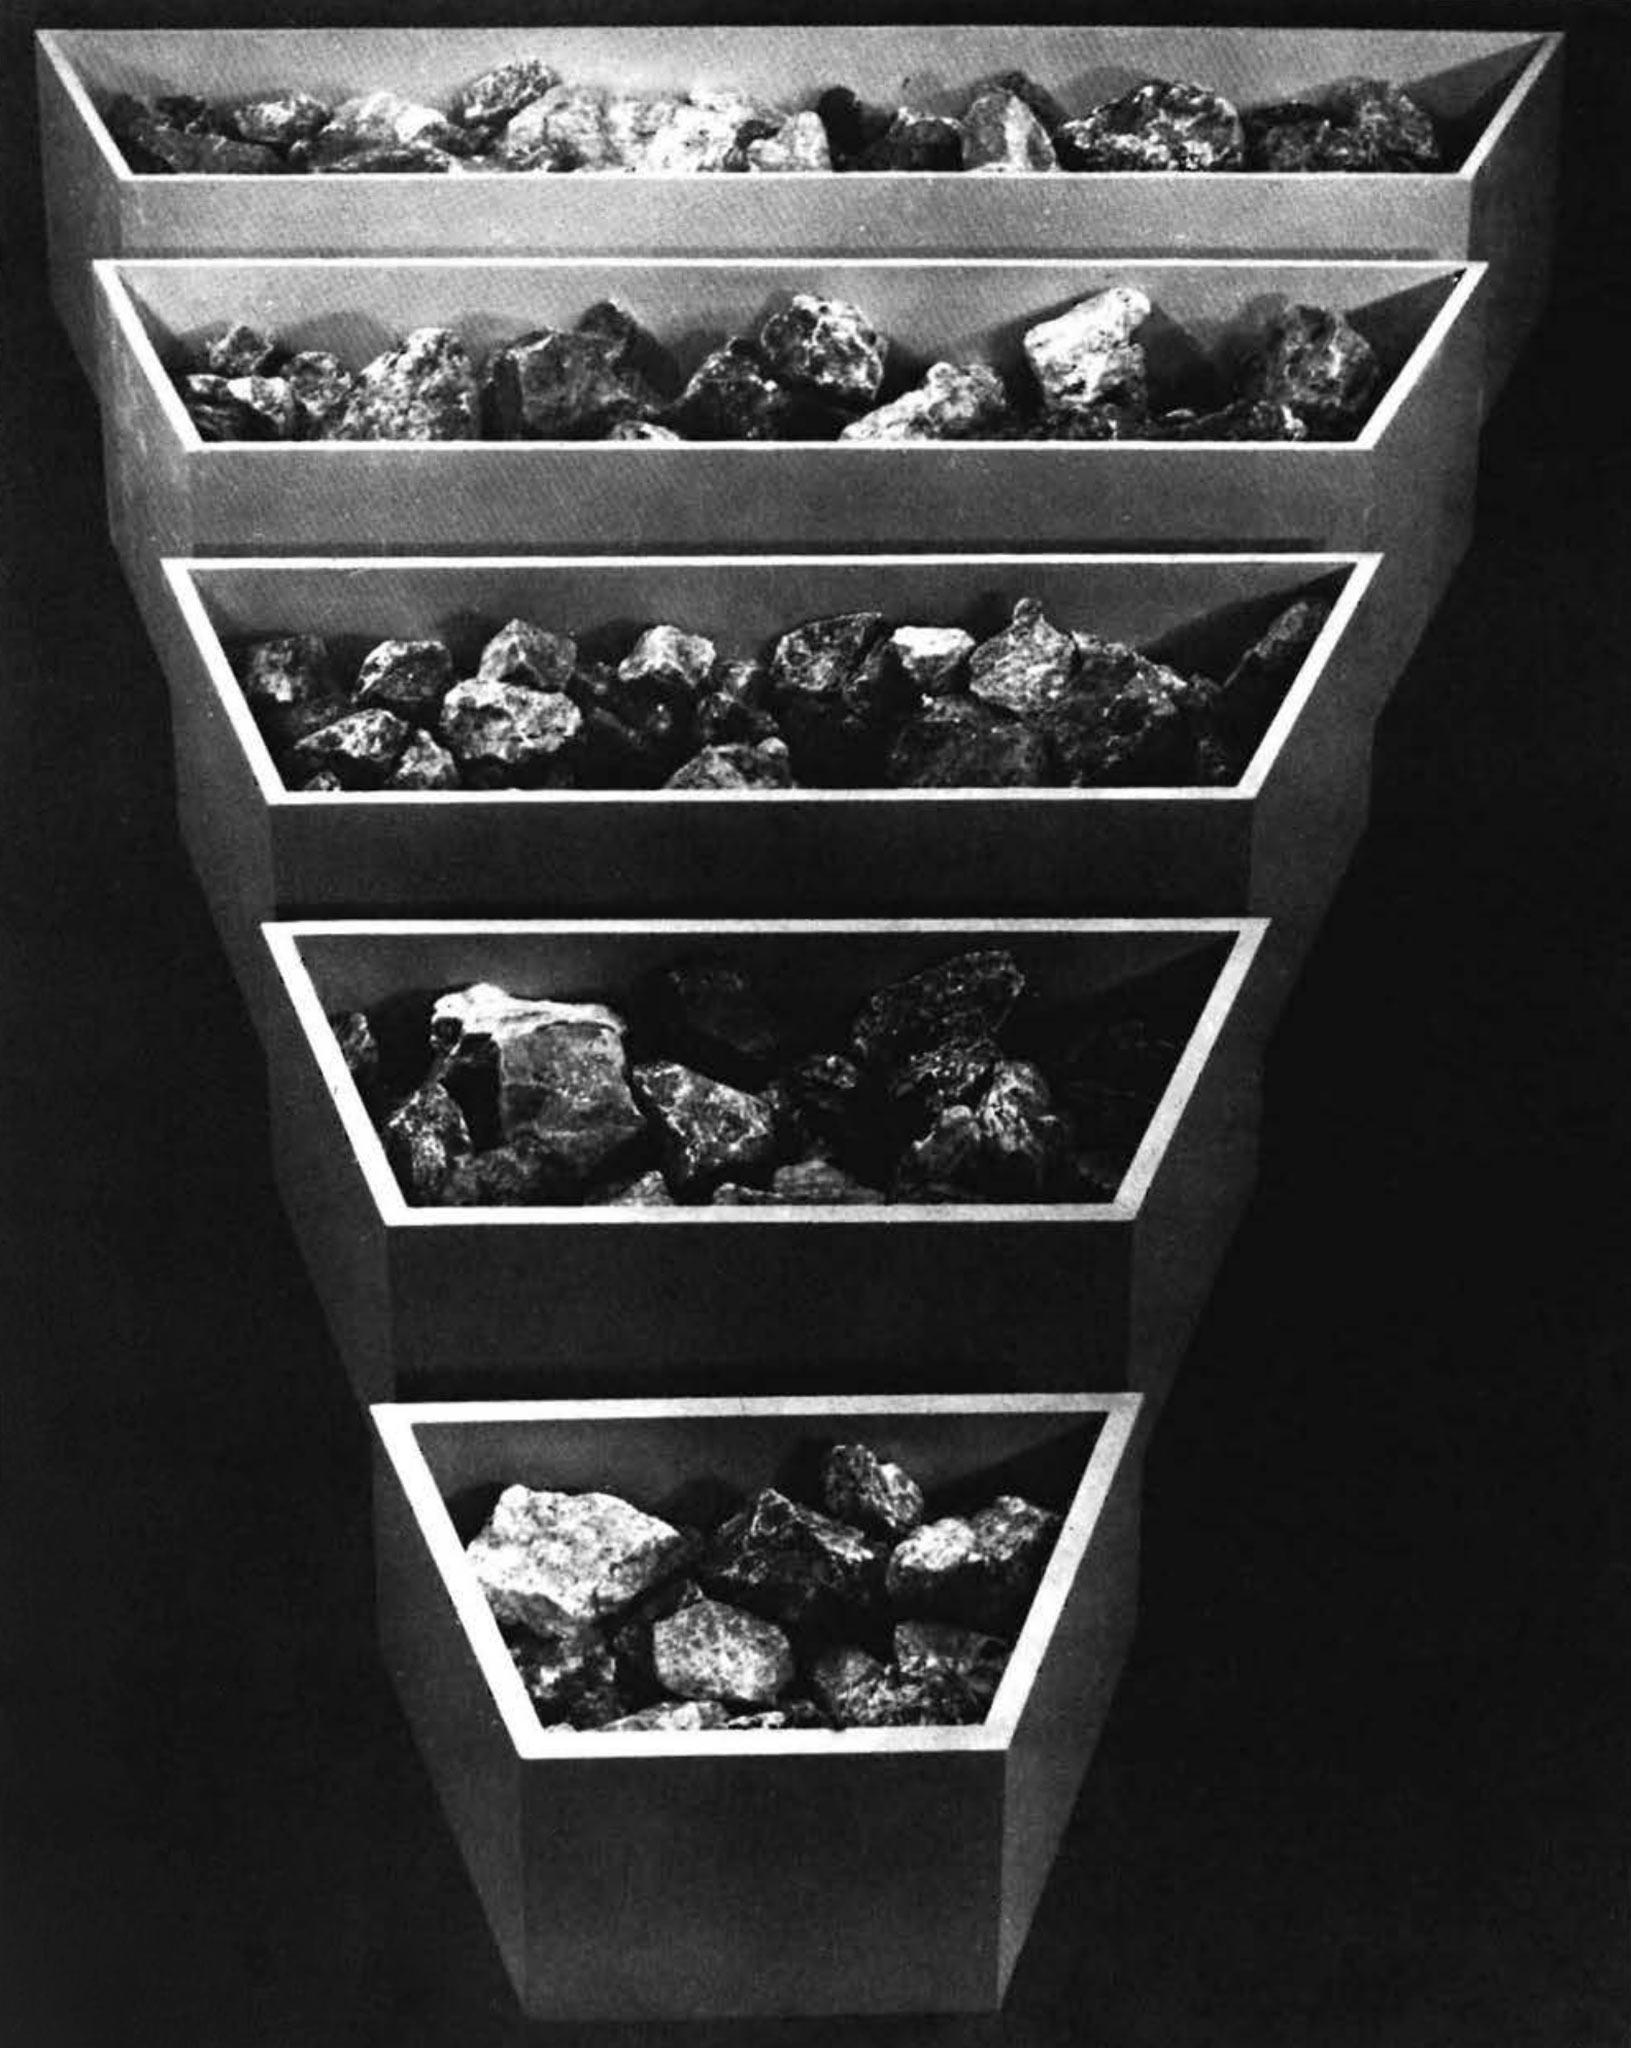 five polygon shaped bins arranged from largest at the top to smallest at the bottom filled with rocks